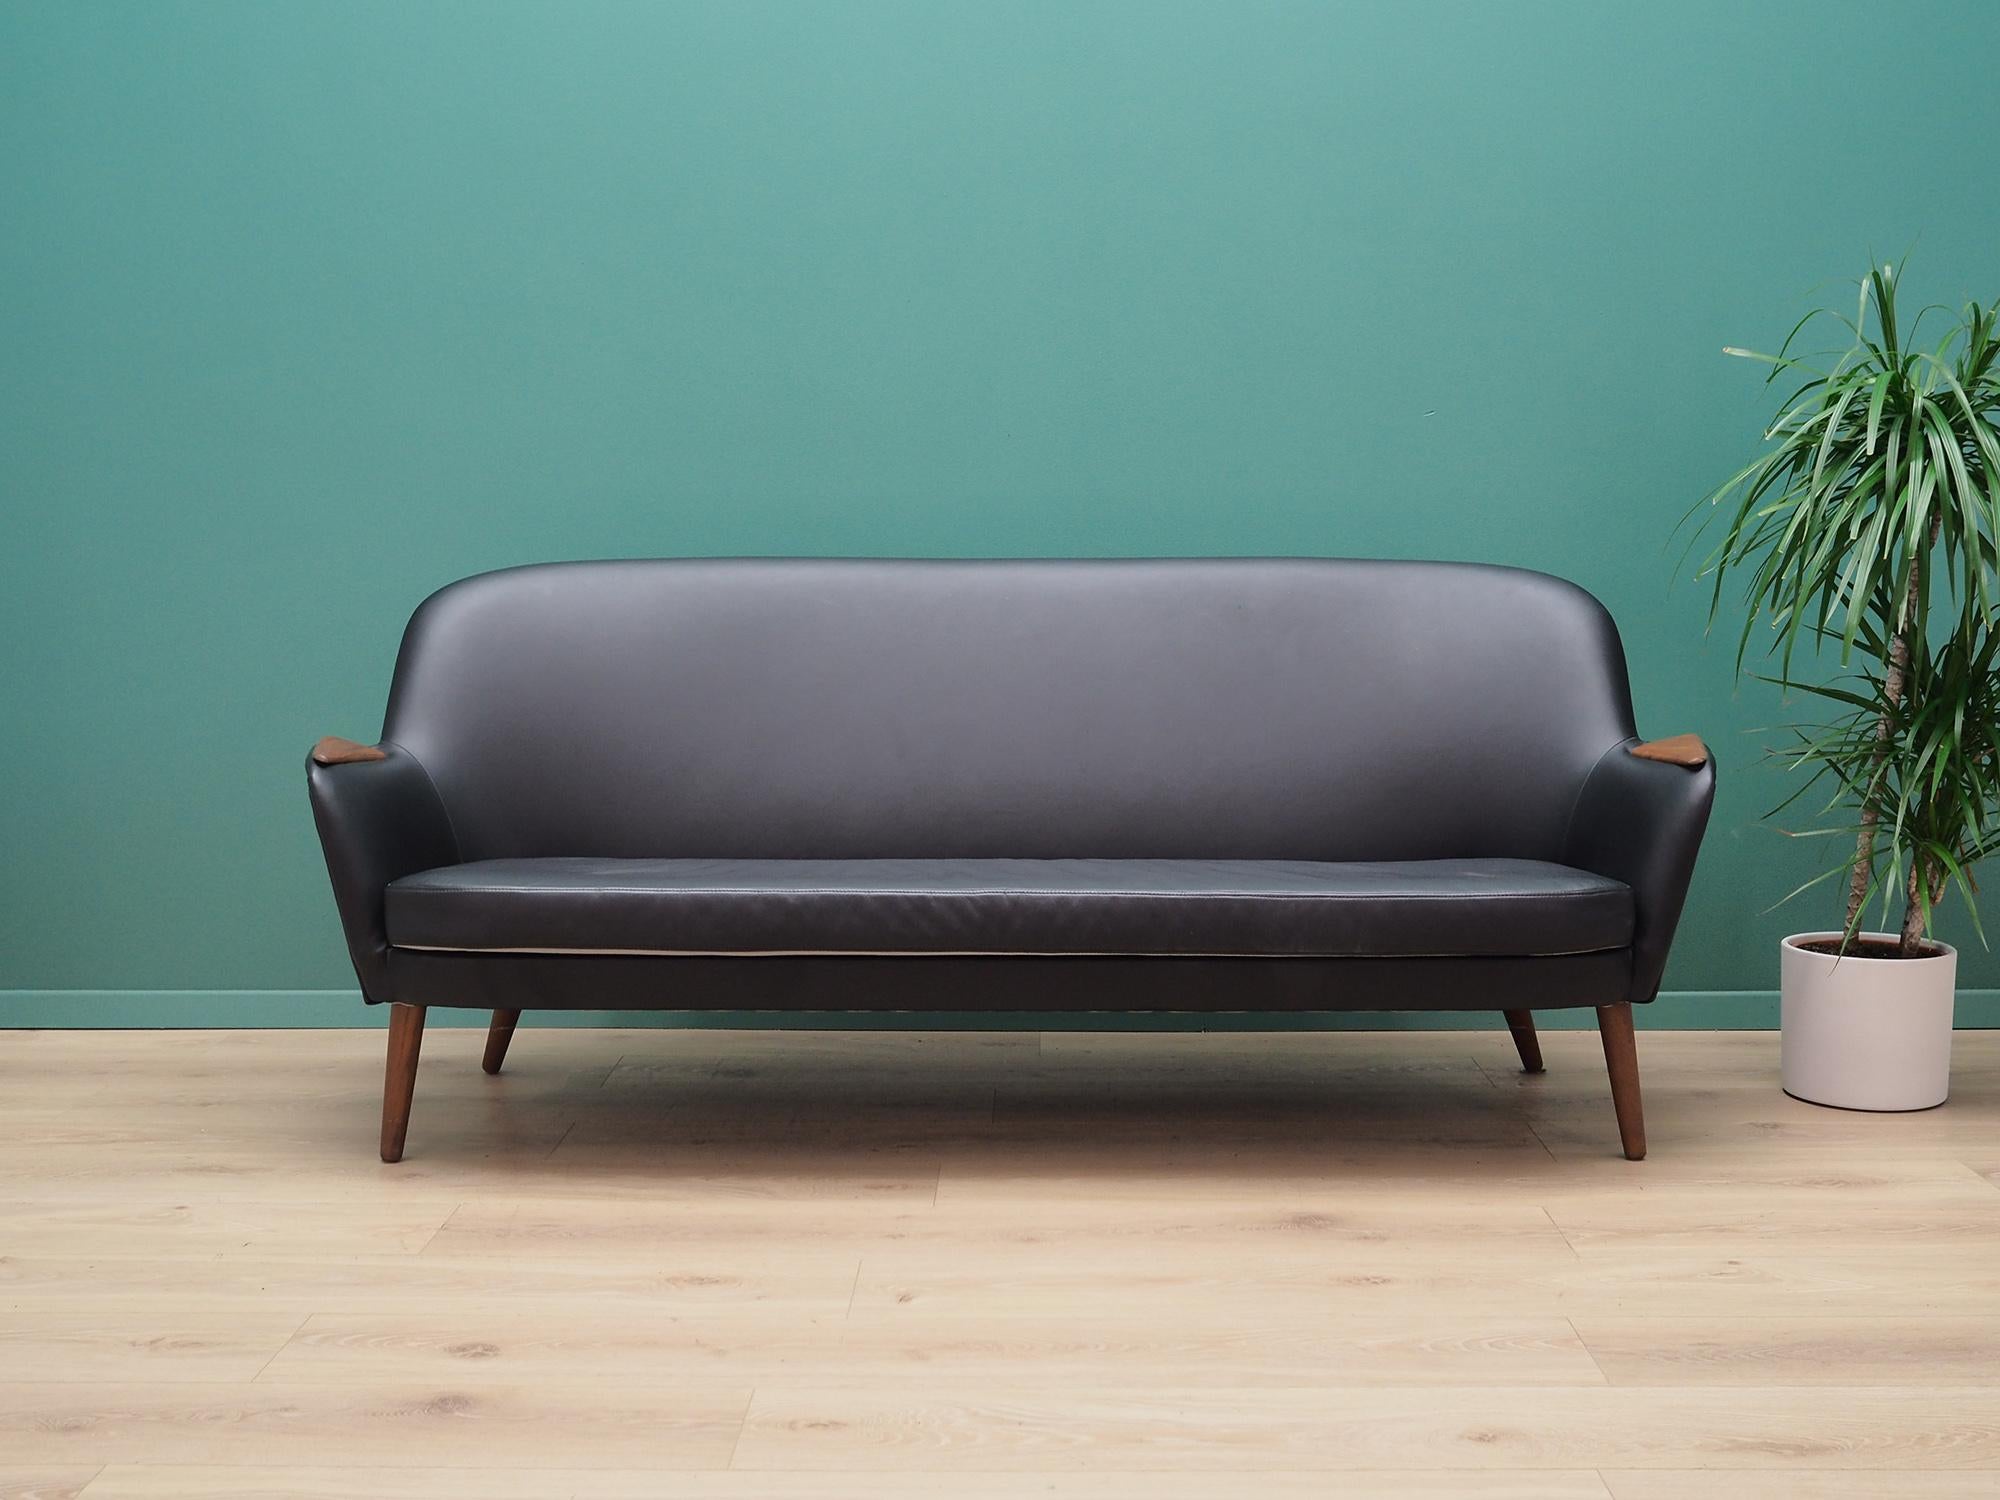 Sofa was made in the 1960s, Danish production.

Construction of the furniture is made of wood. Legs made of solid teak wood. Sofa has undergone renovation. Upholstery has been replaced by new one and it's made in black, high quality natural